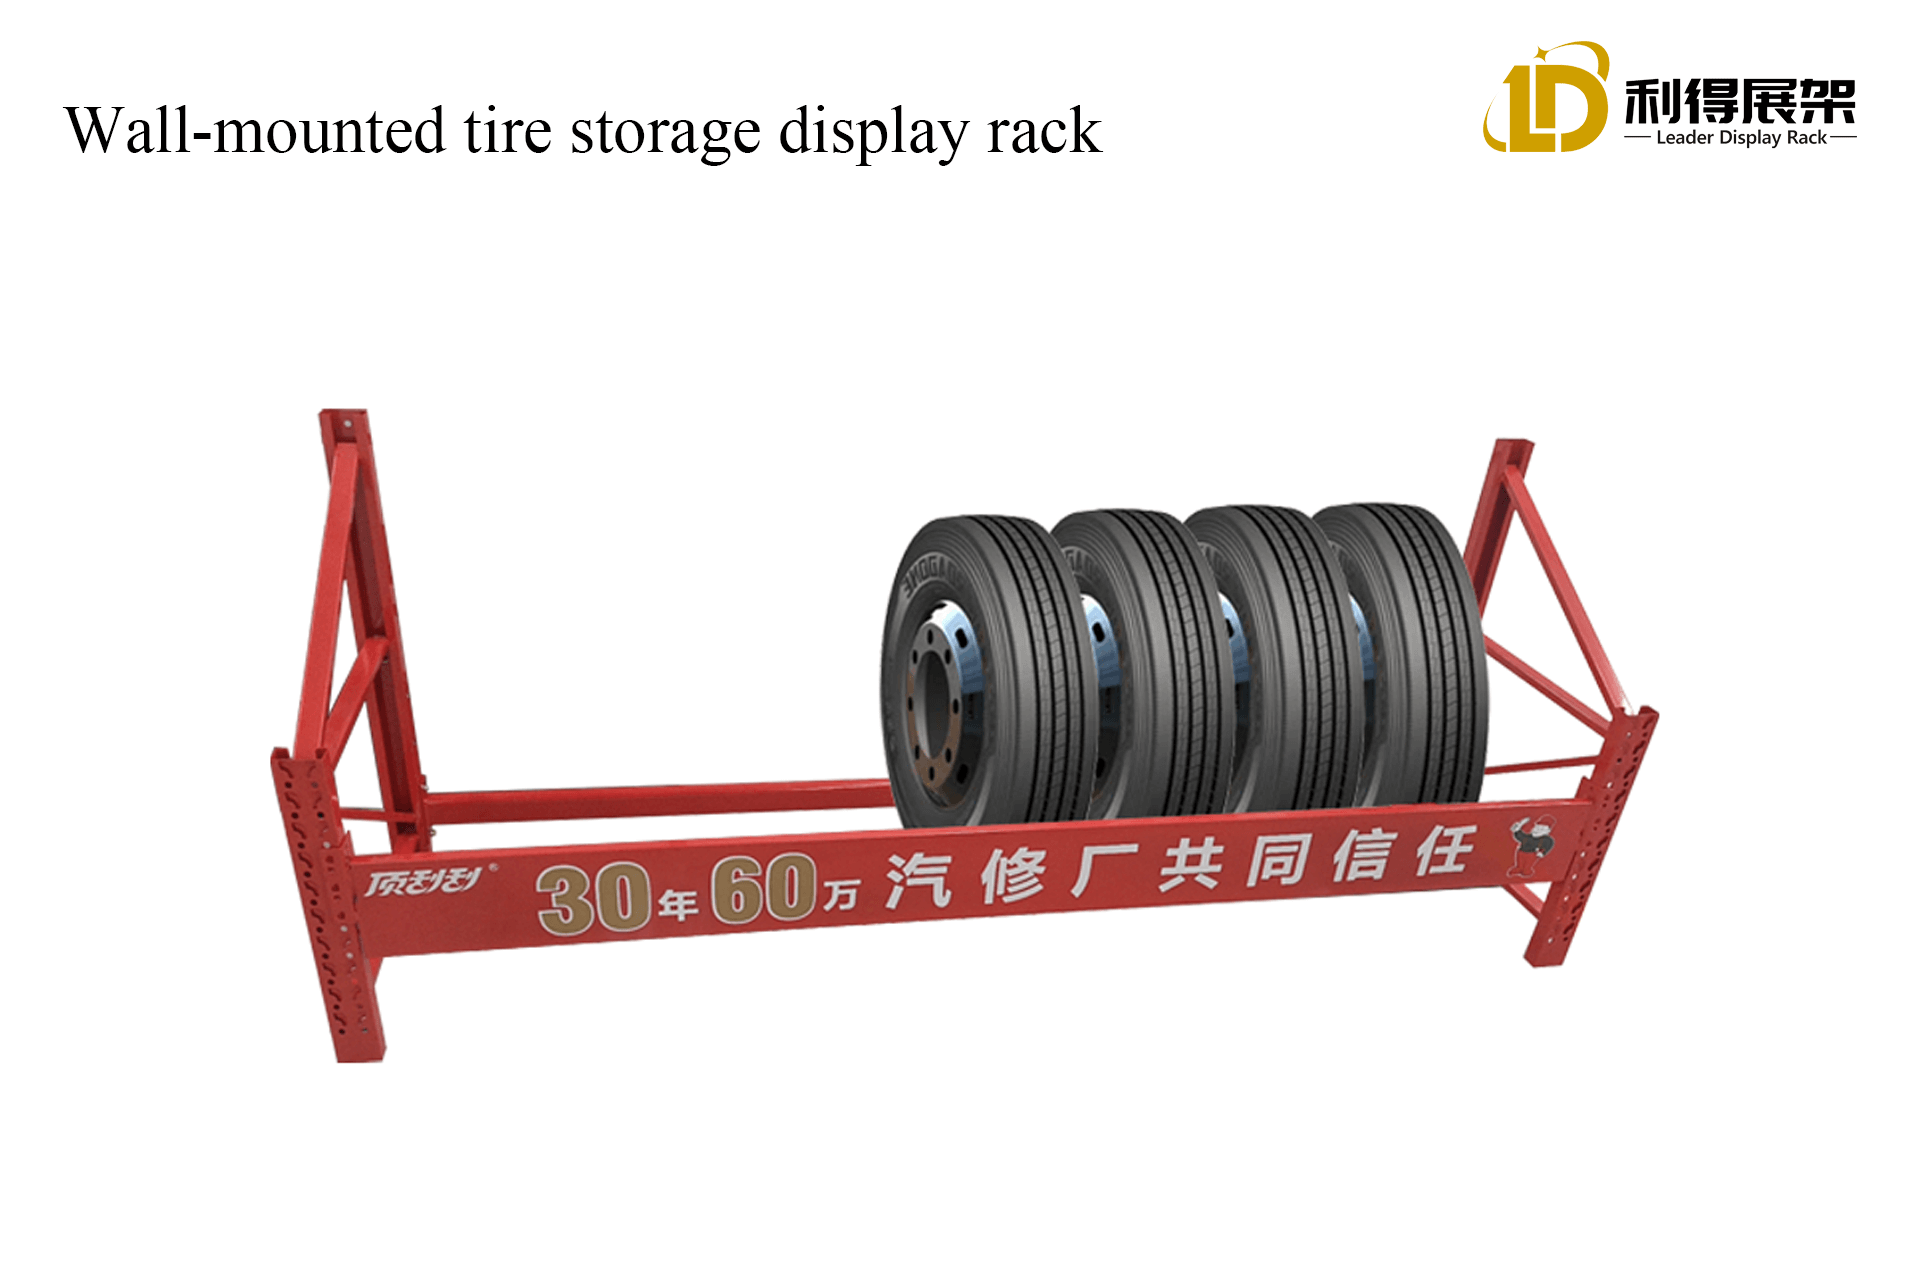 The Essential Artifact of Modern Garage, The Multi-functional Analysis of Wall-mounted Tire Display Rack